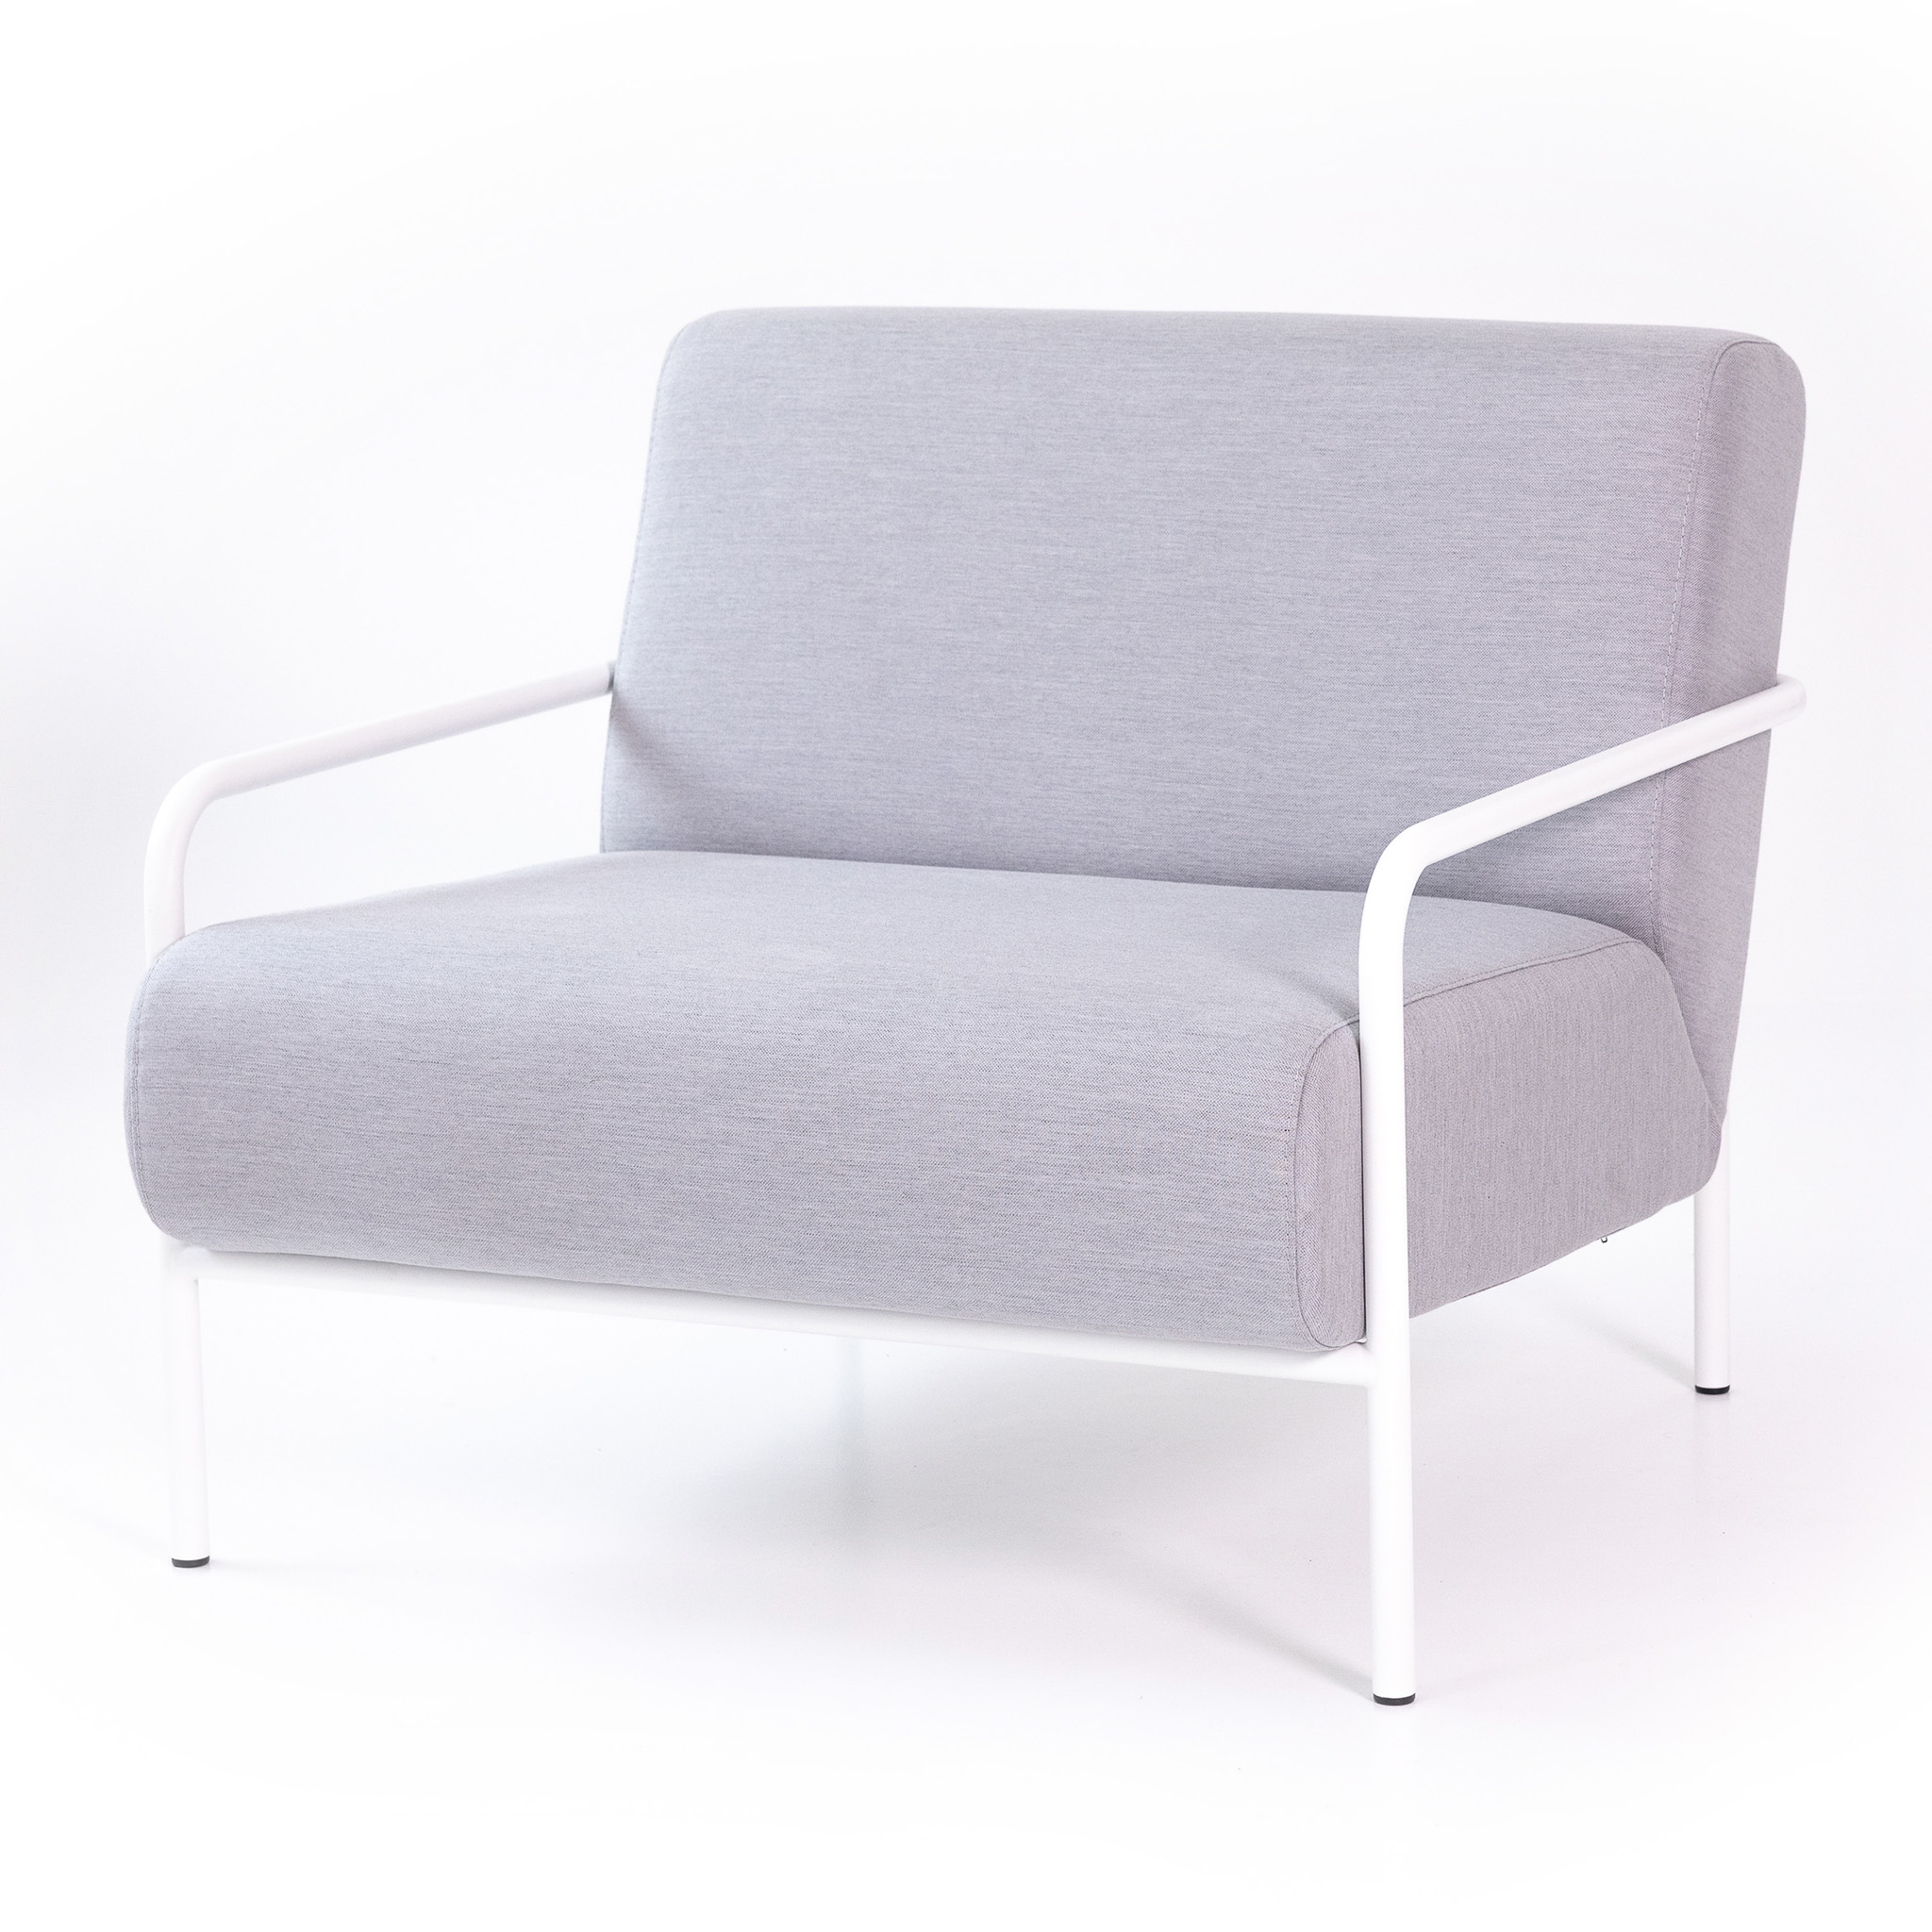 METALLBUDE // SOLEA - OUTDOOR LOUNGE CHAIR | WHITE